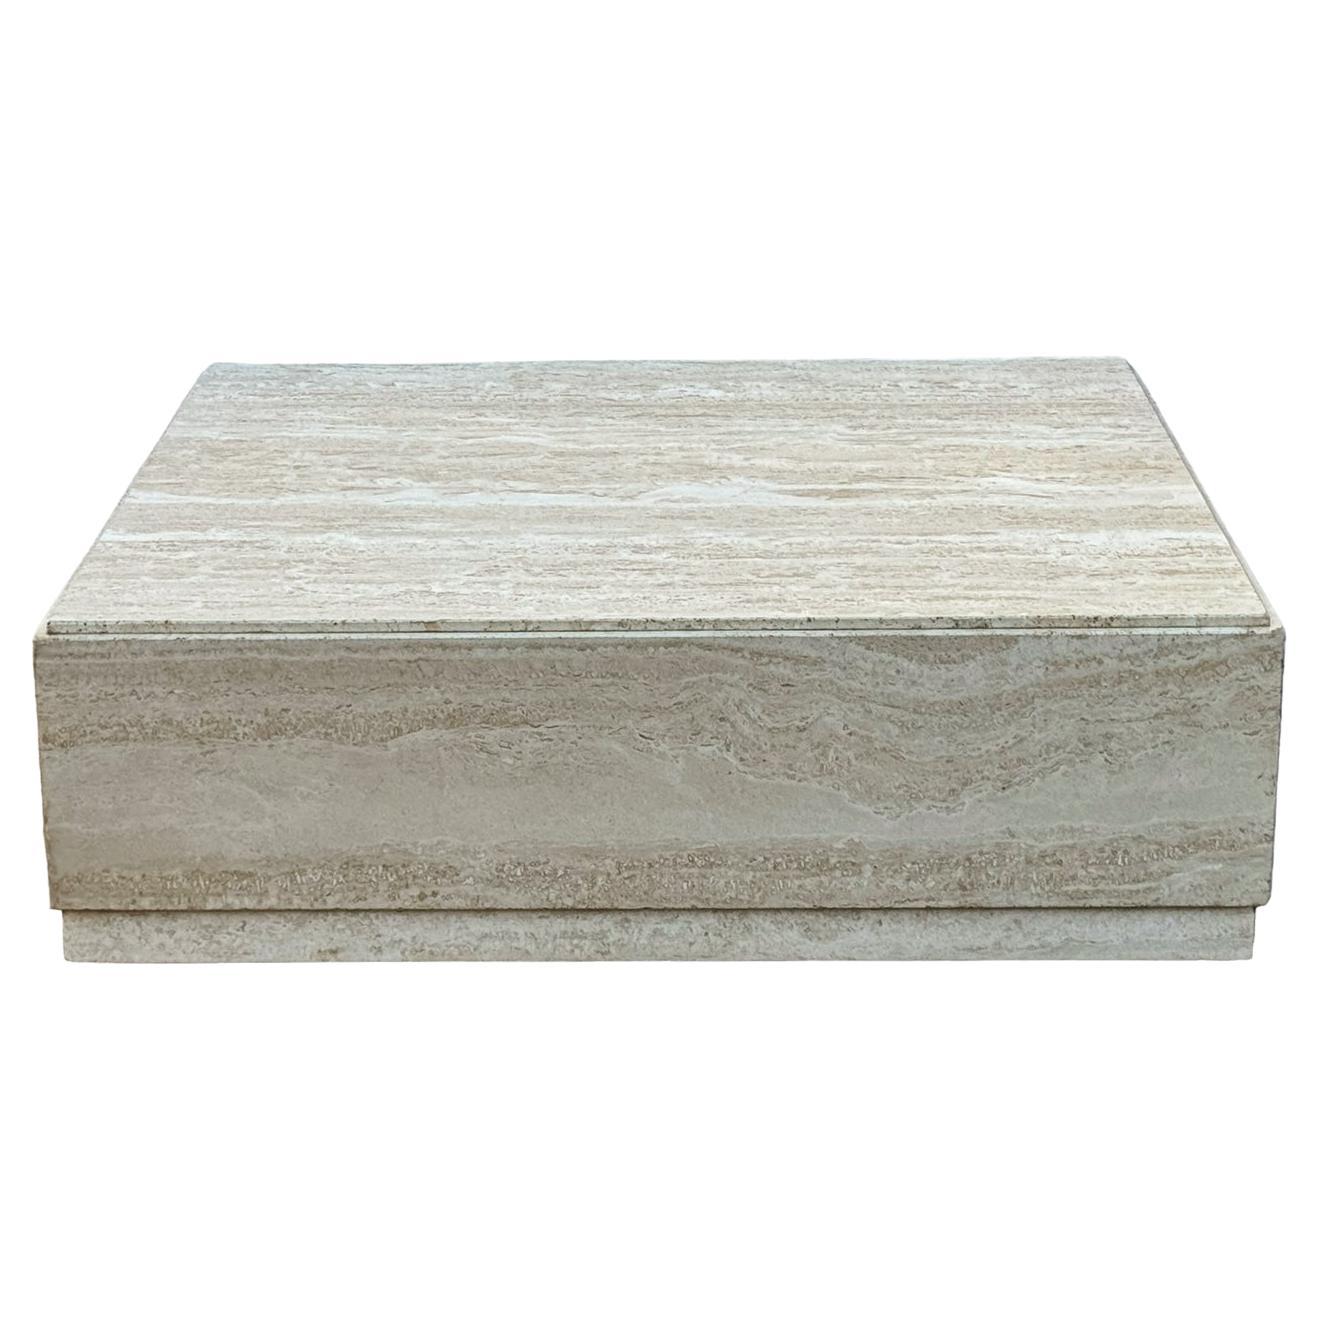 Low Midcentury Italian Modern Square Travertine Marble Cube Cocktail Table  For Sale